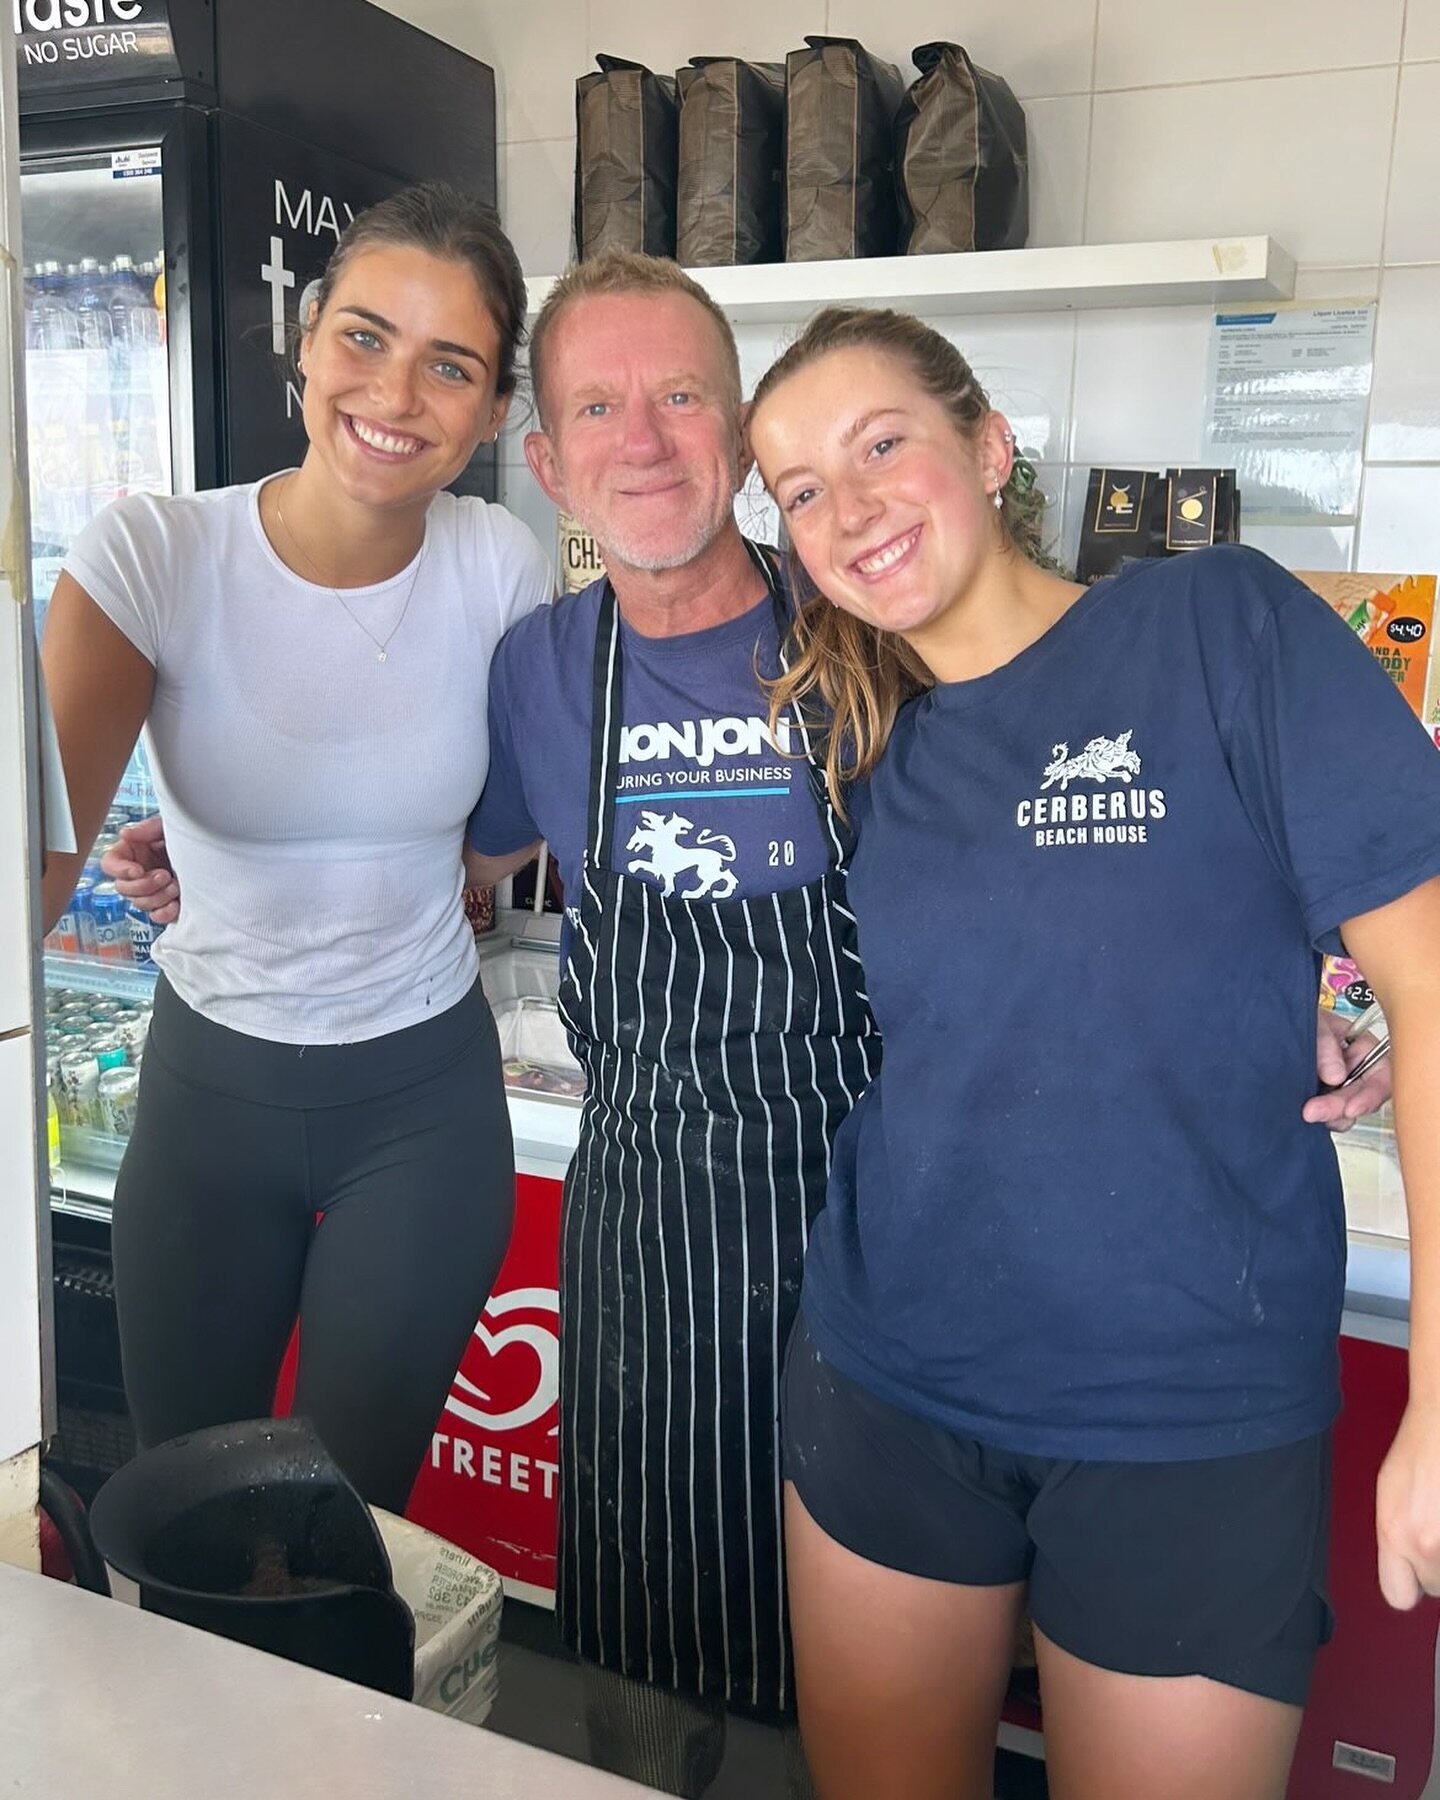 Long weekend is here, and our beautiful team is ready for it! ☀️🐰

There&rsquo;s nothing better than a piece of fish on Good Friday so come down for breakfast, lunch or dinner today, we&rsquo;ll sort you out! ⁣🐠💙

Please note that there will be a 